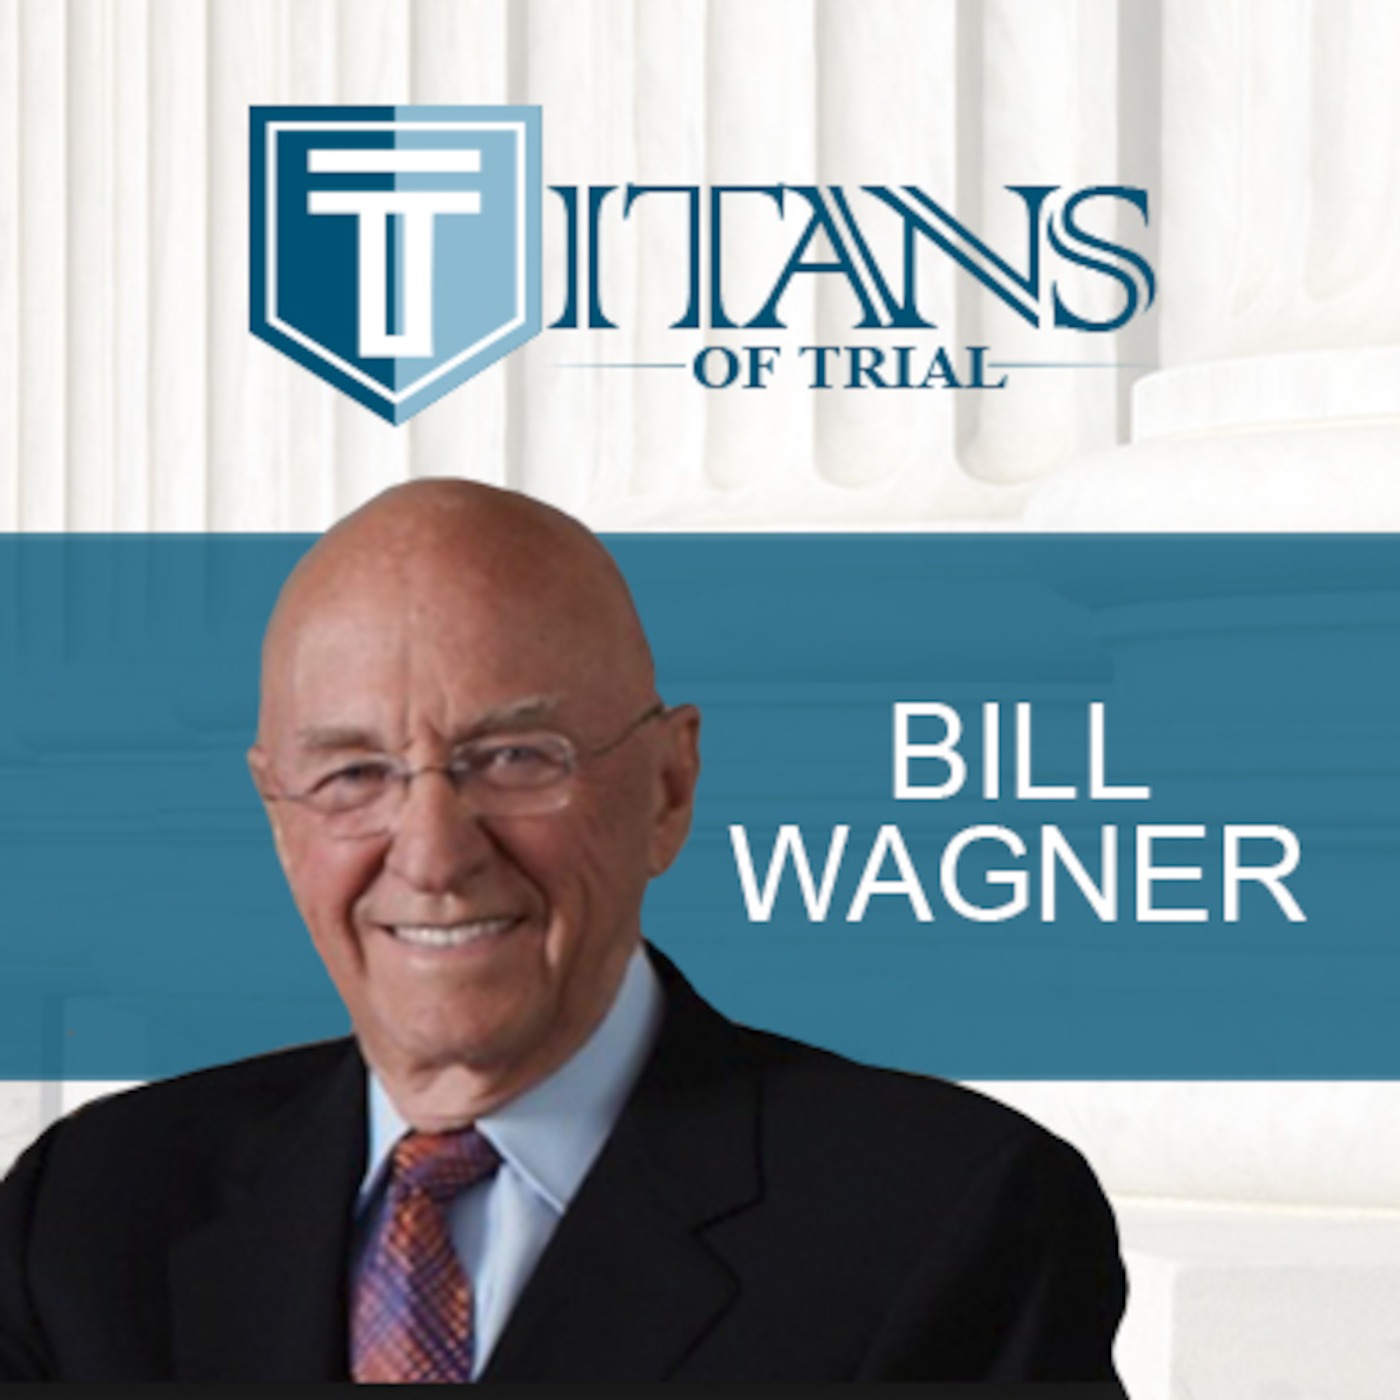 Titans of Trial - Bill Wagner